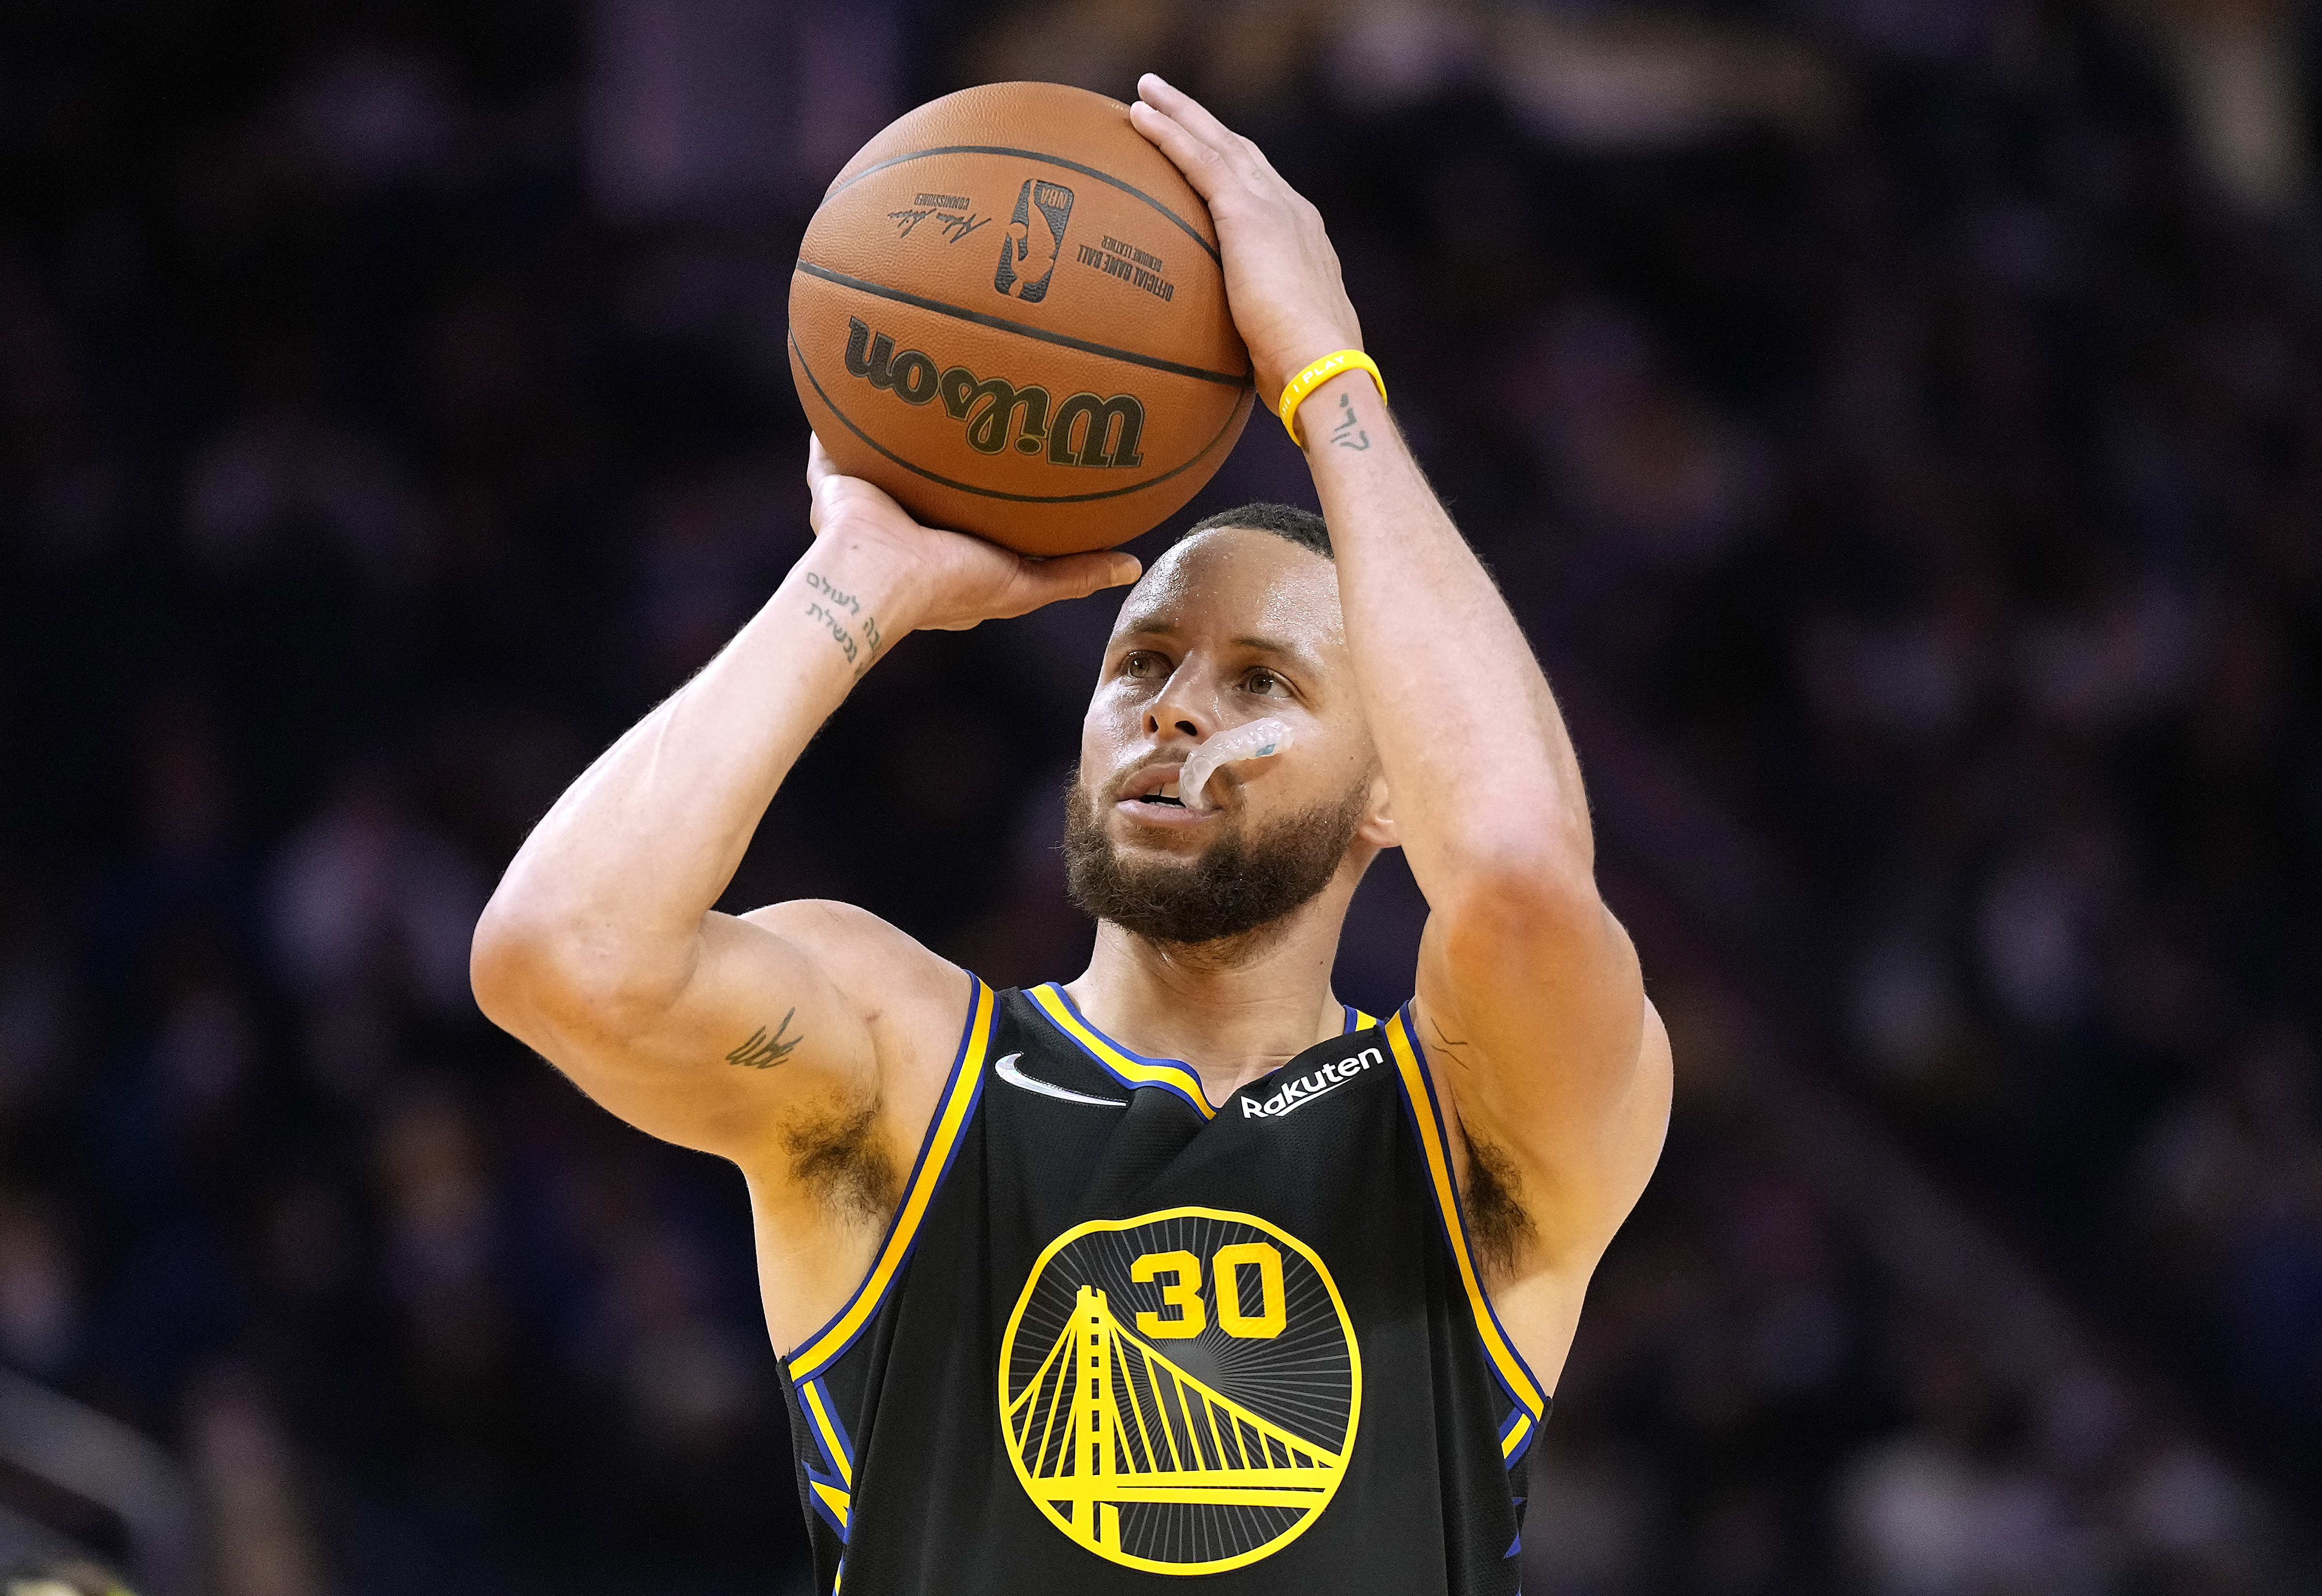 Stephen Curry #30 of the Golden State Warriors shoots a technical foul shot against the Dallas Mavericks during the second half of an NBA basketball game at Chase Center on January 25, 2022 in San Francisco, California.&nbsp;